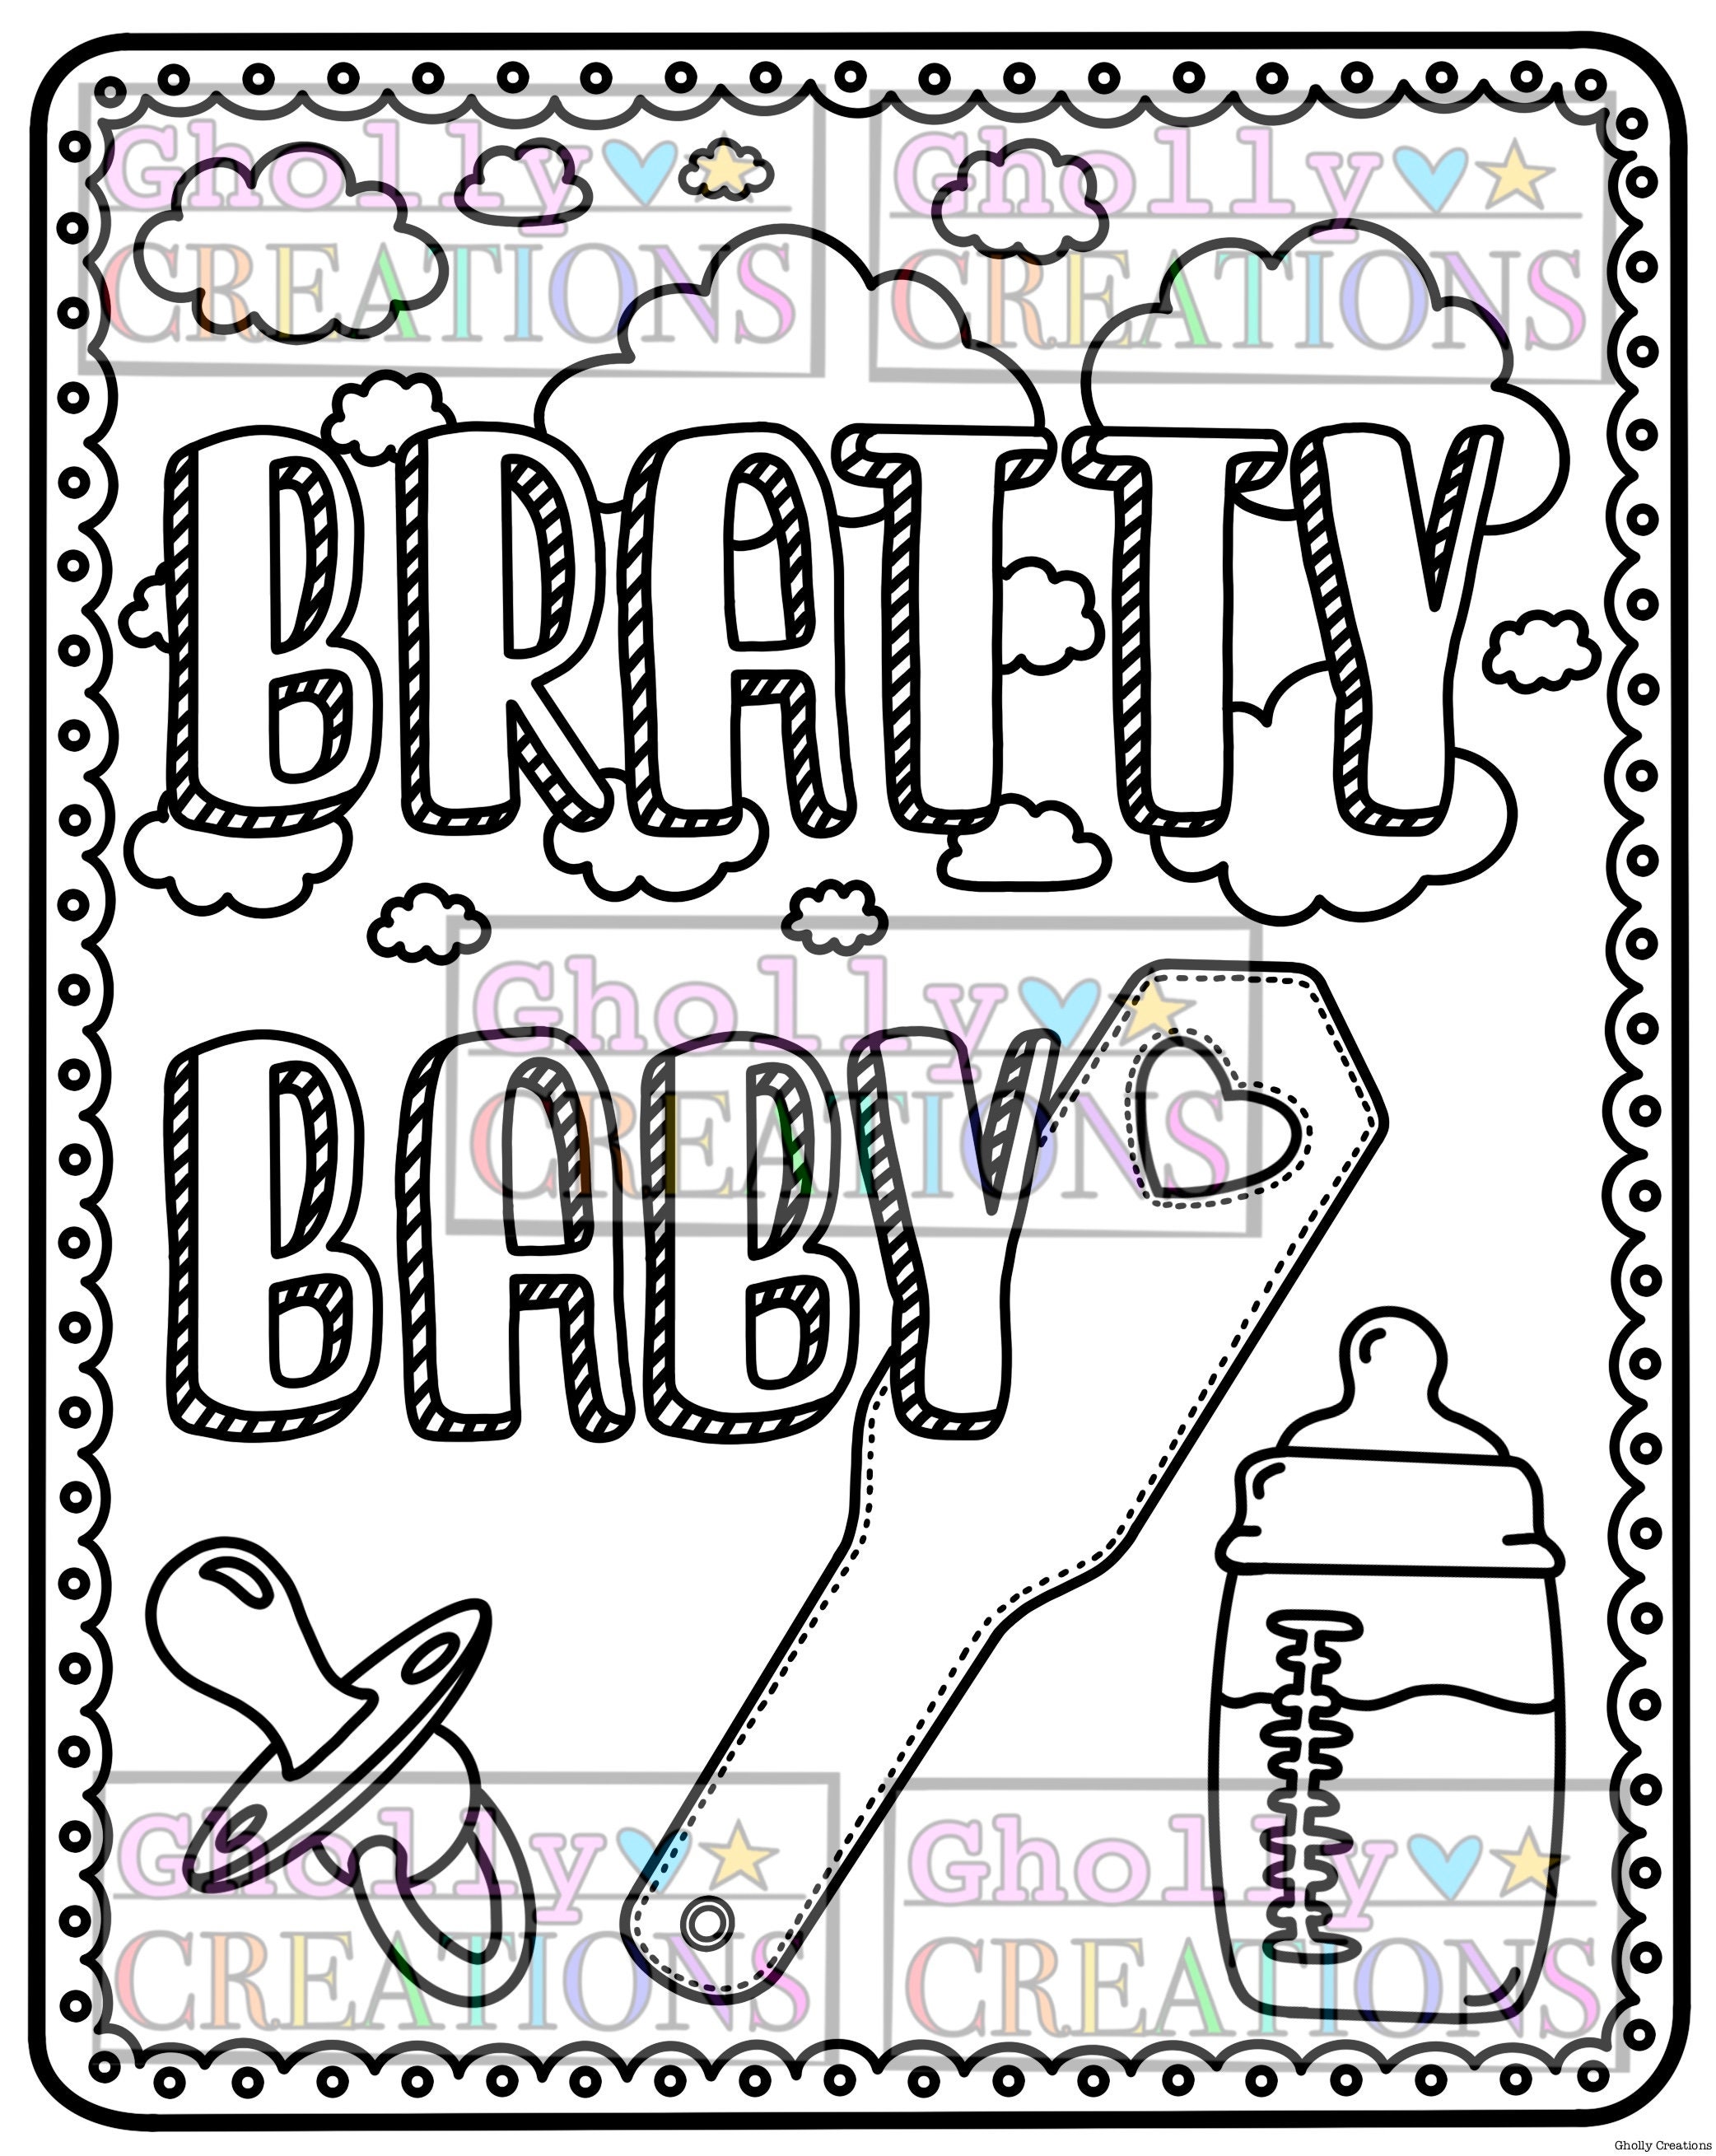 Bratty baby ddlgcglbdsmabdl coloring page